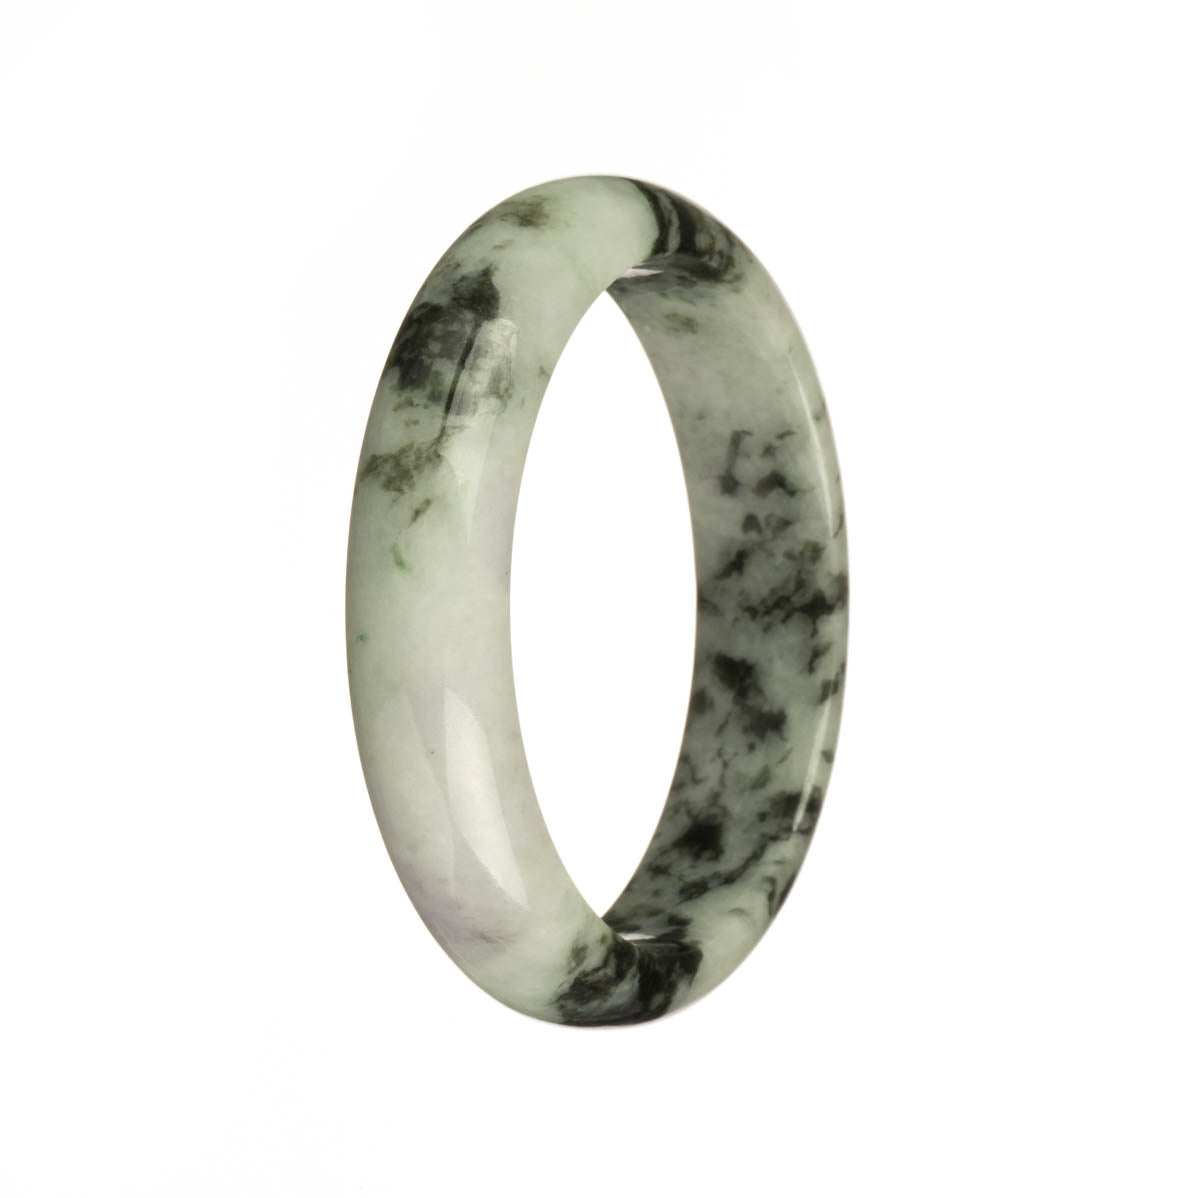 A half moon-shaped Burmese jade bangle with an untreated pale green color and a unique green pattern.